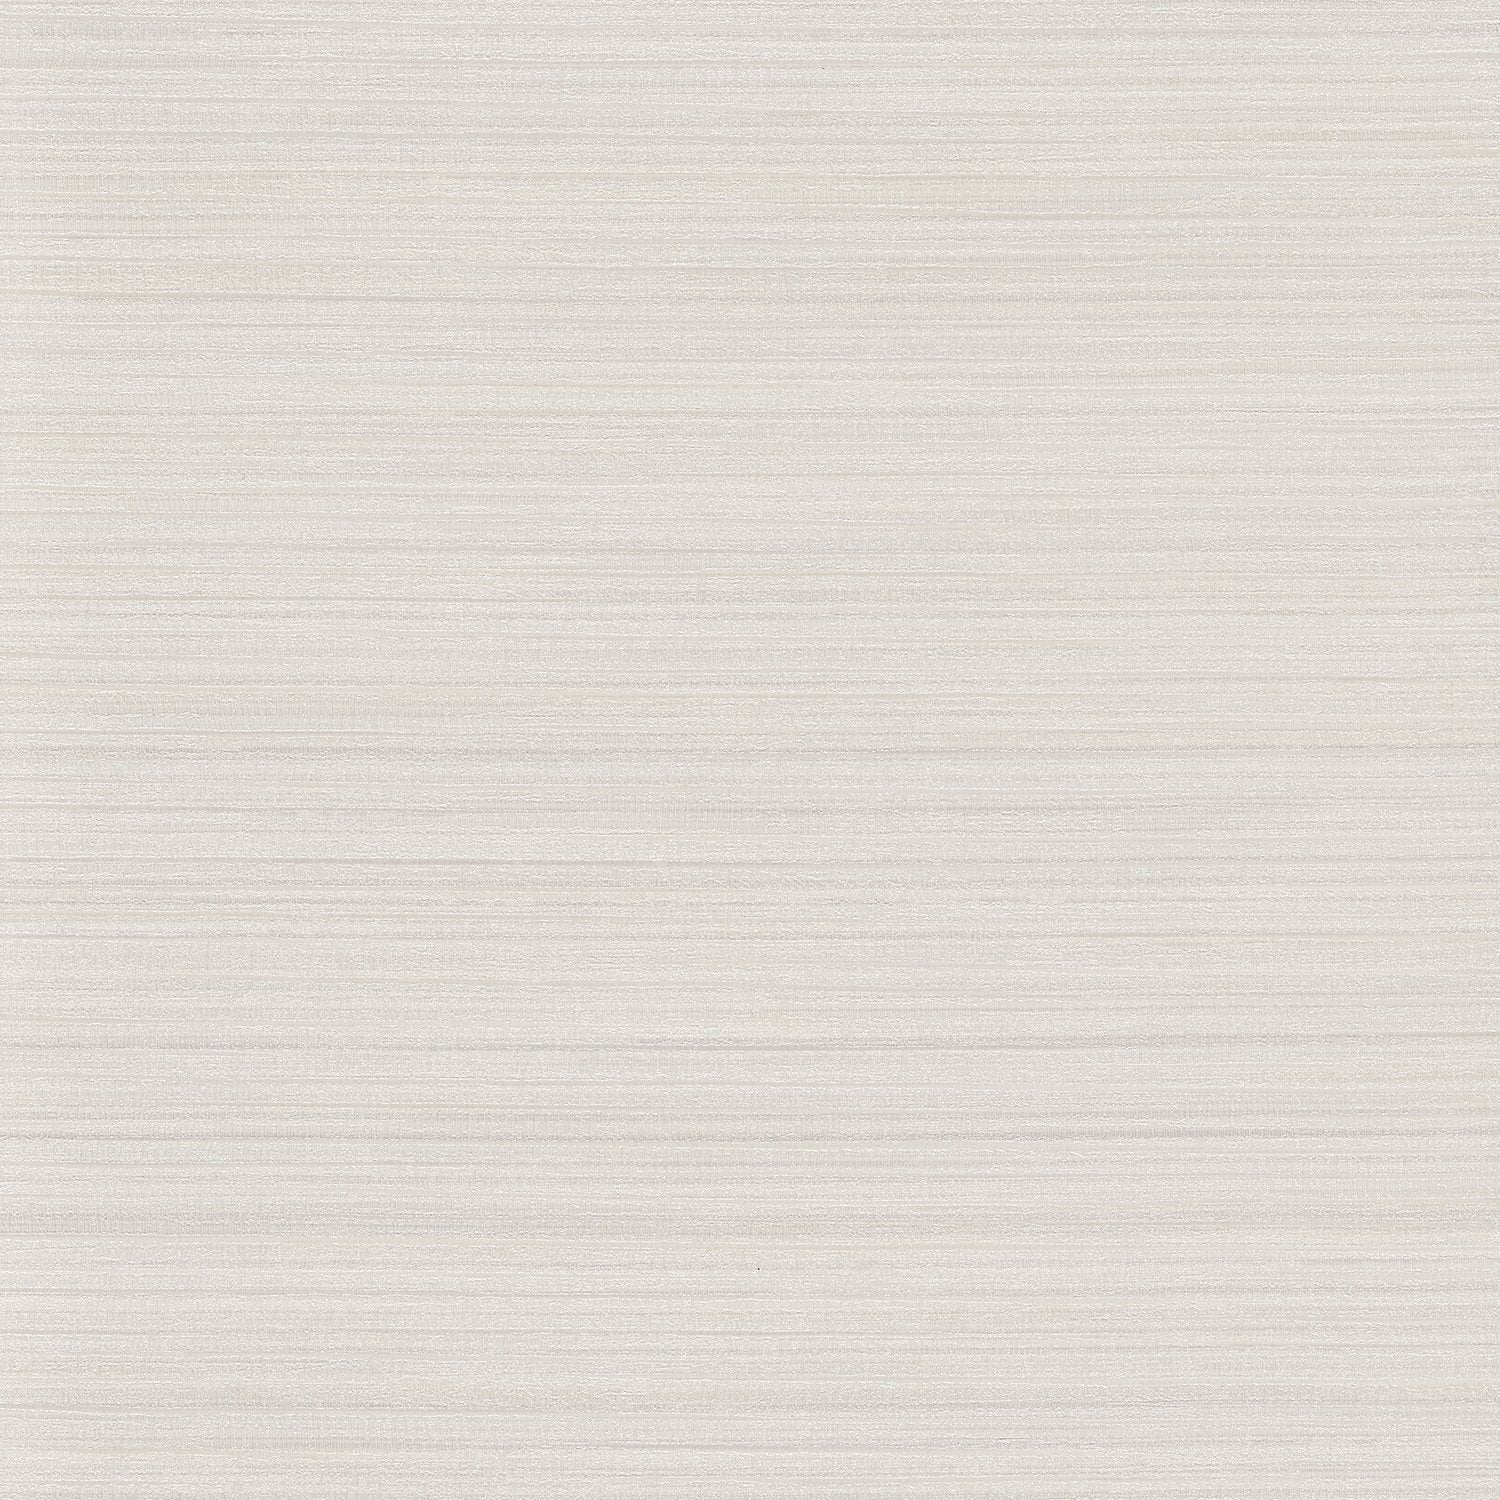 Gallery Silk - Y47737 Titanium - Wallcovering - Vycon - Kube Contract